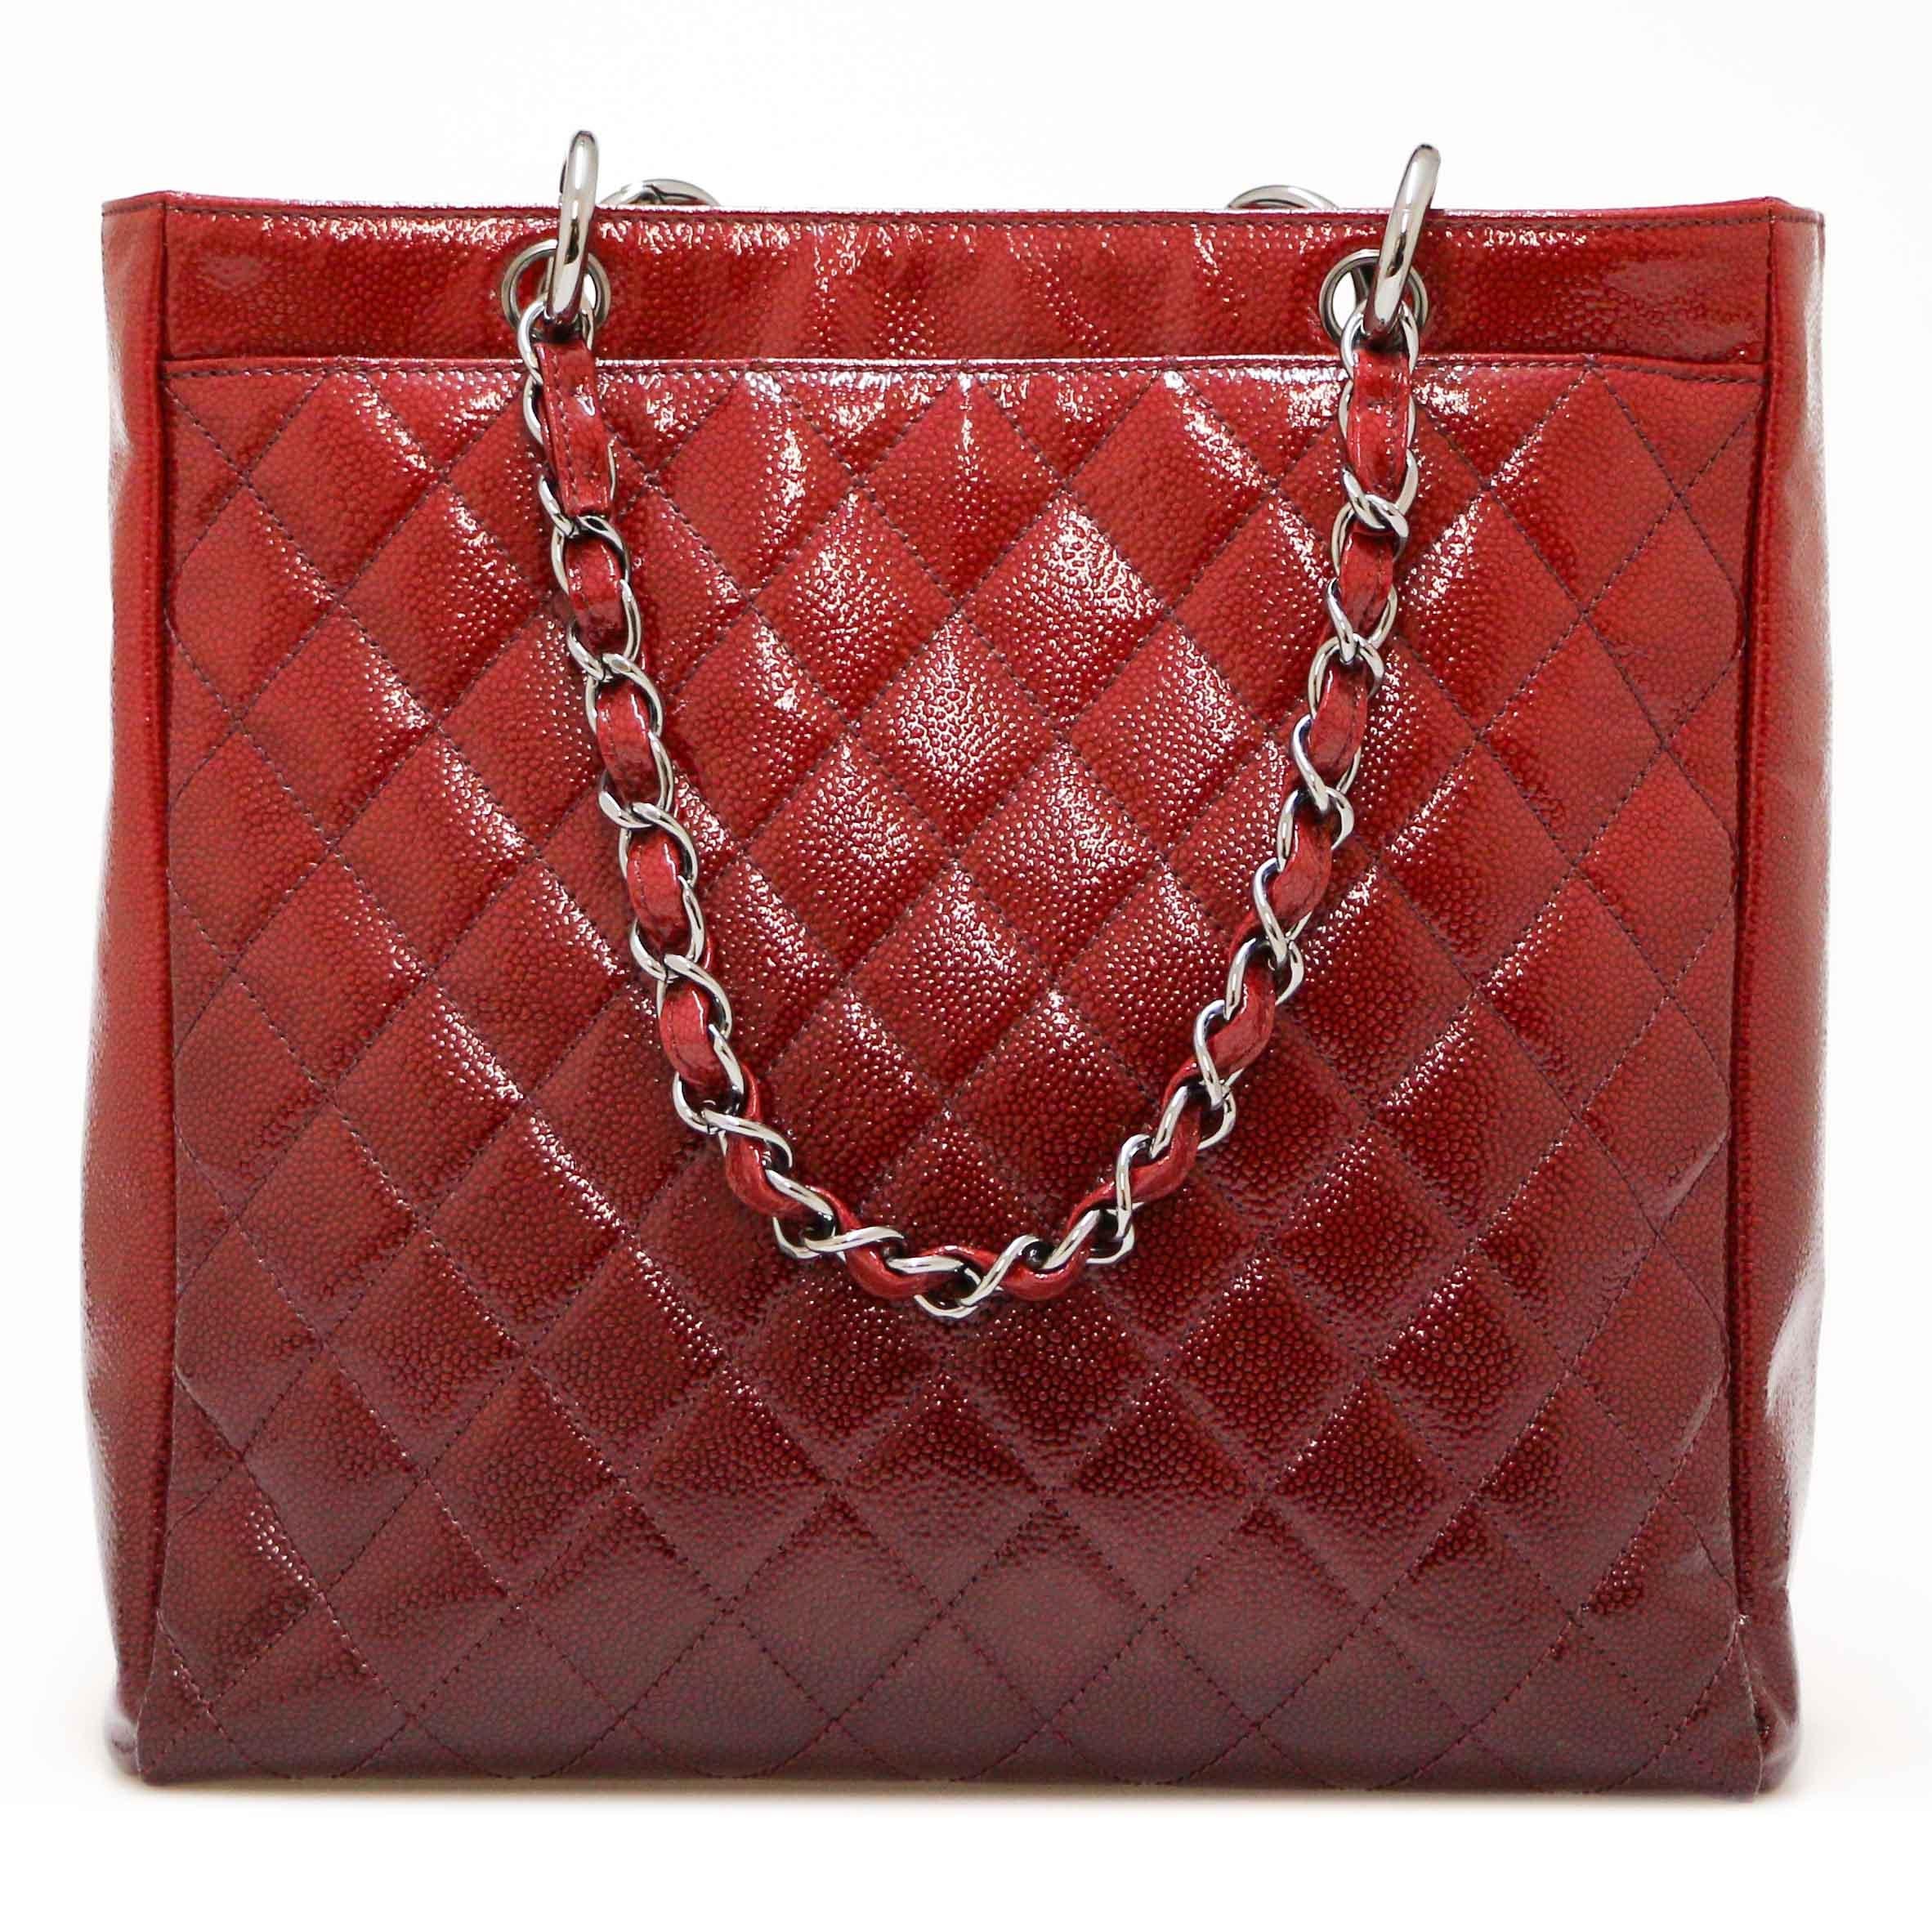 Beautiful Chanel red gradient tote bag !

Condition: very good, delivered in its original Chanel dustbag.
Made in Italy
Collection : tote bag
Material : semi-matt patent grained leather
Interior : dark purple satin
Color : burgundy and red